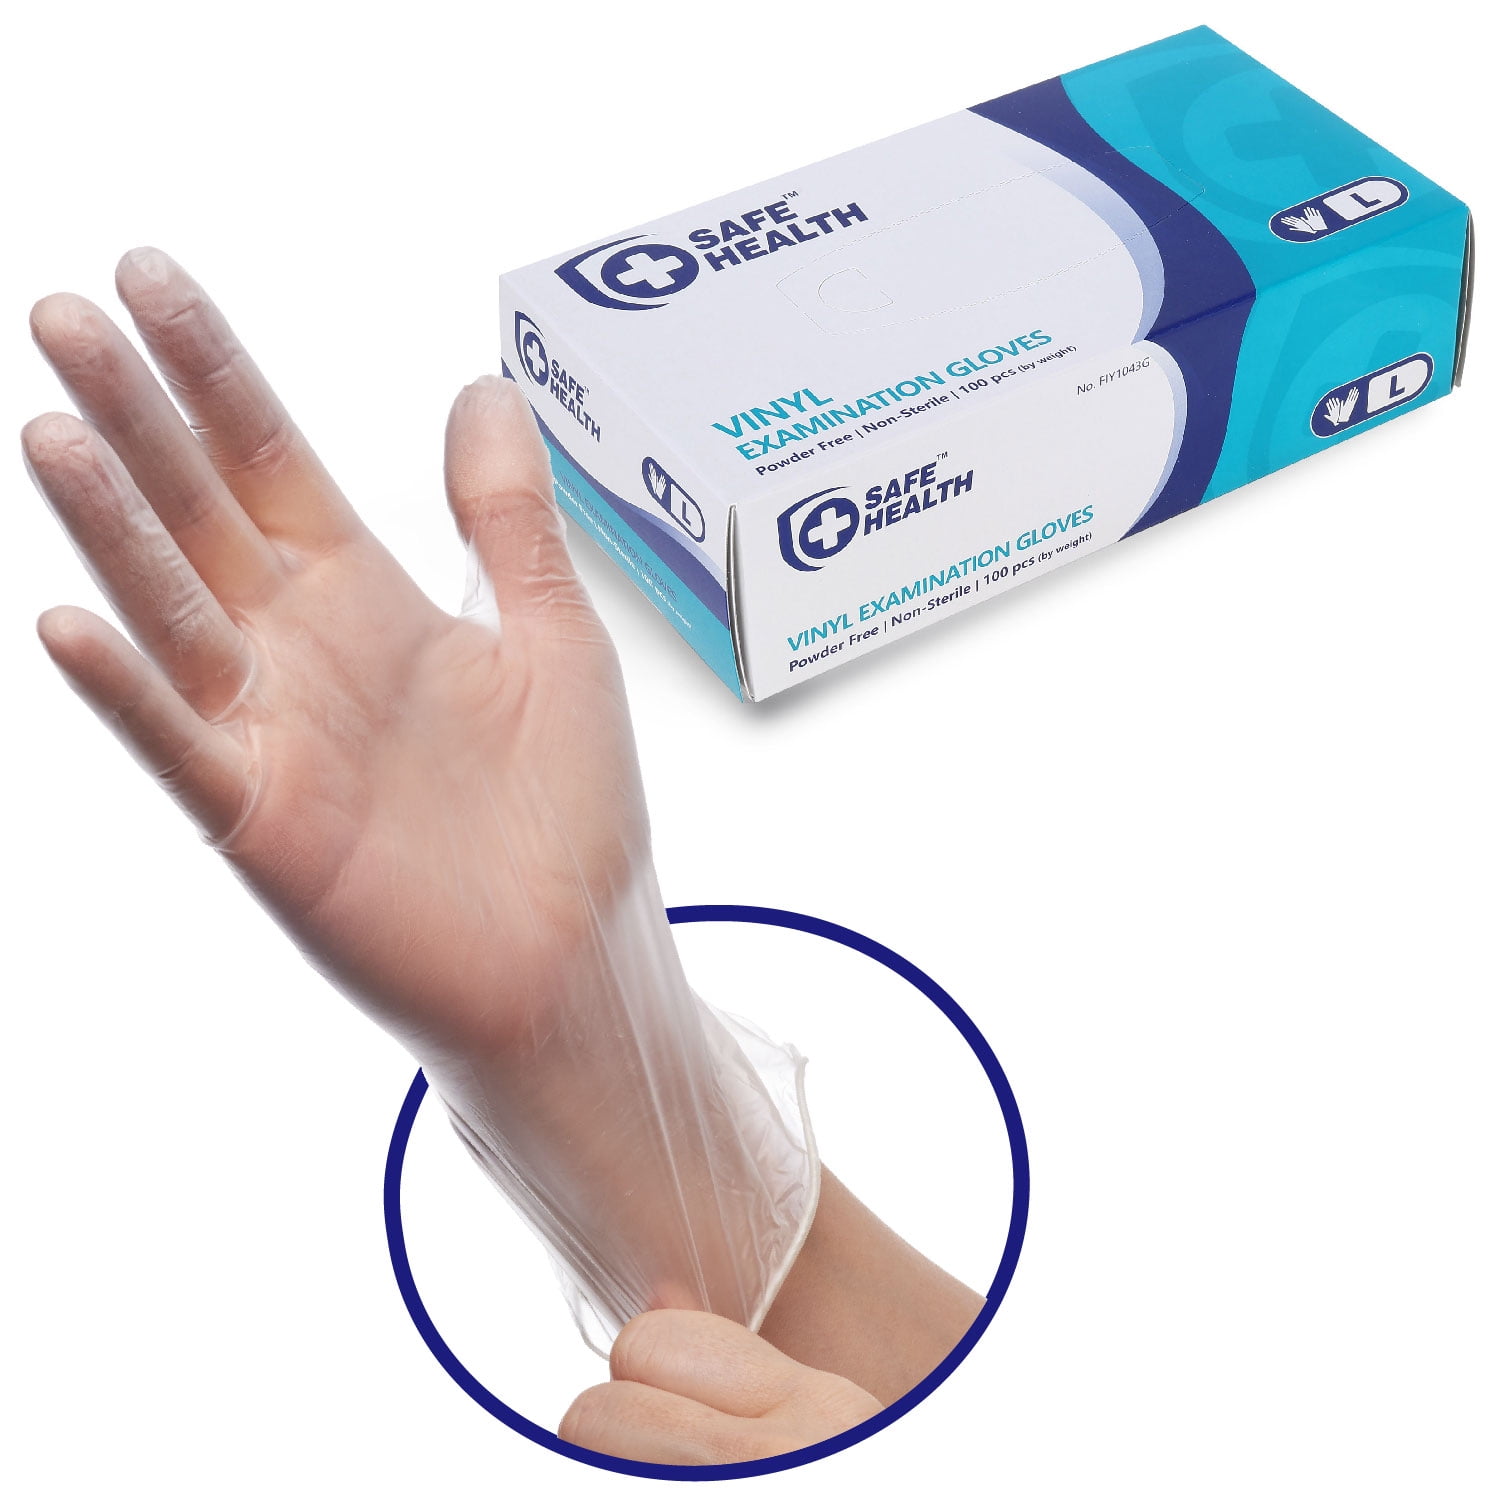 Comfy Package Clear Powder Free Vinyl Disposable Plastic Gloves (100 Small)